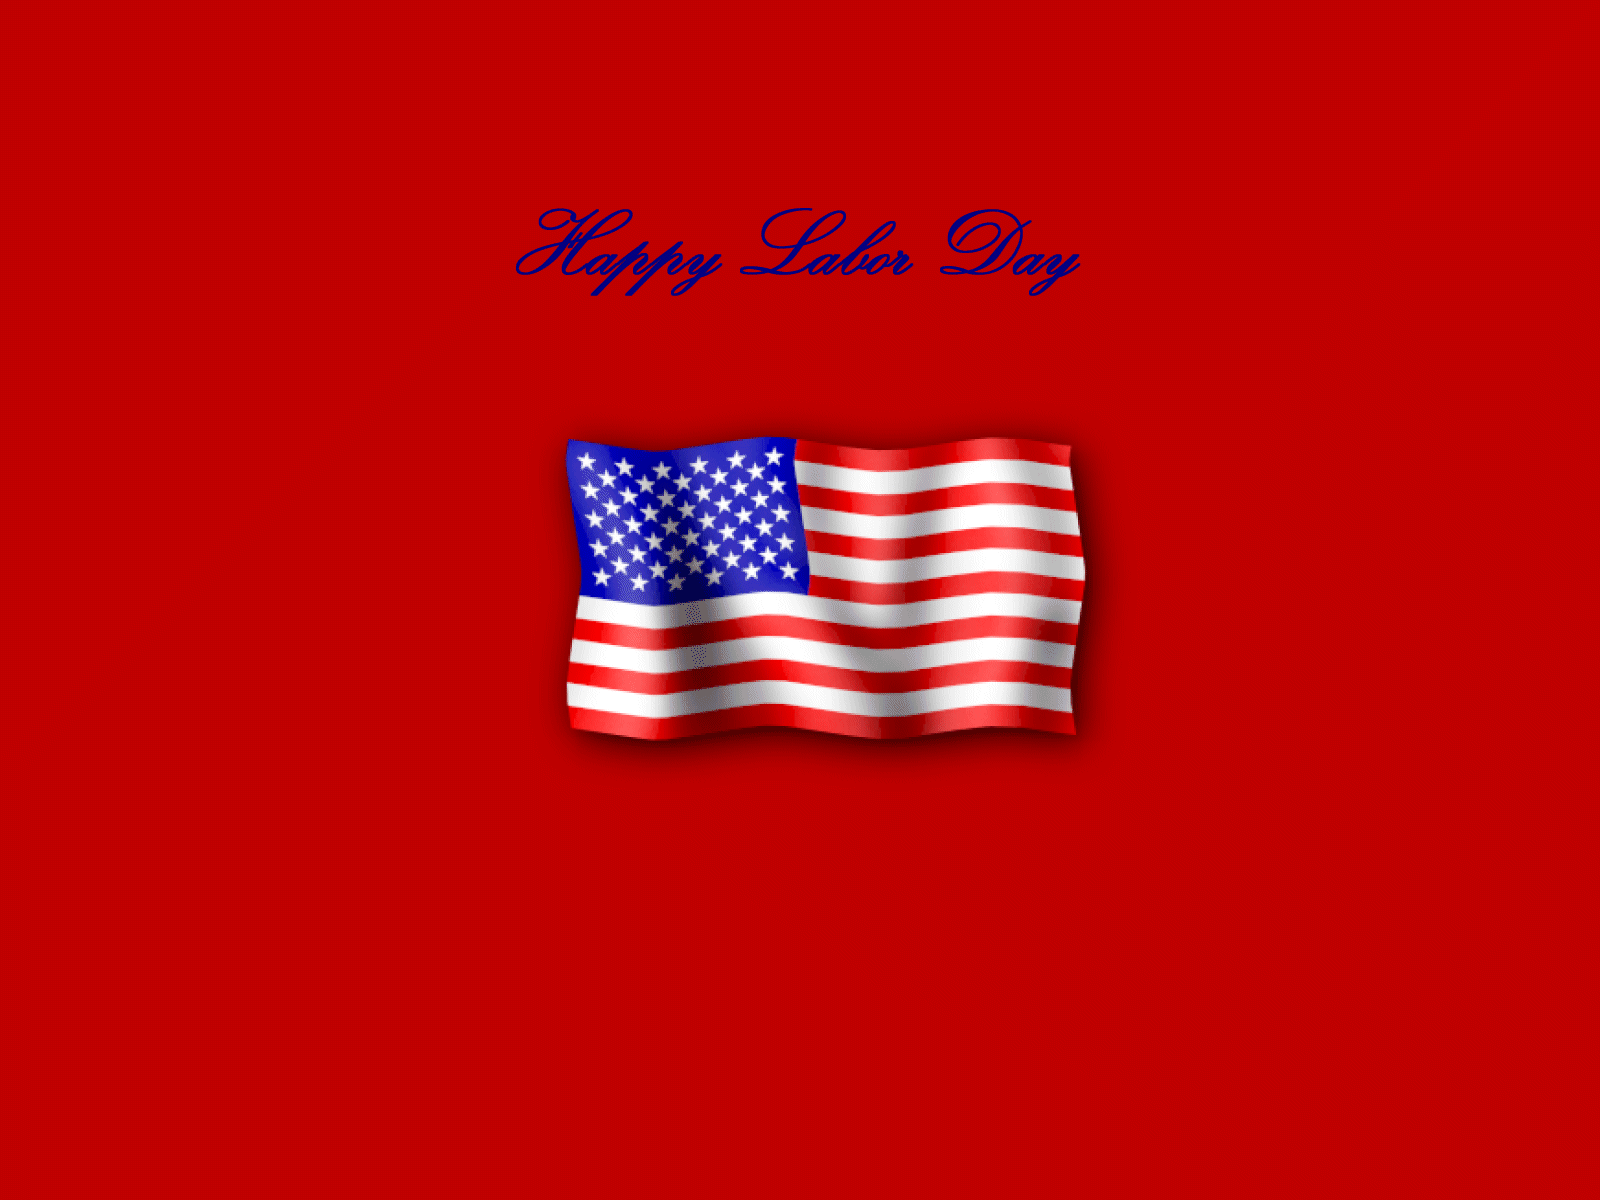 Labor Day Wallpaper Background for Desktop Featuring a Red Background with American Flag